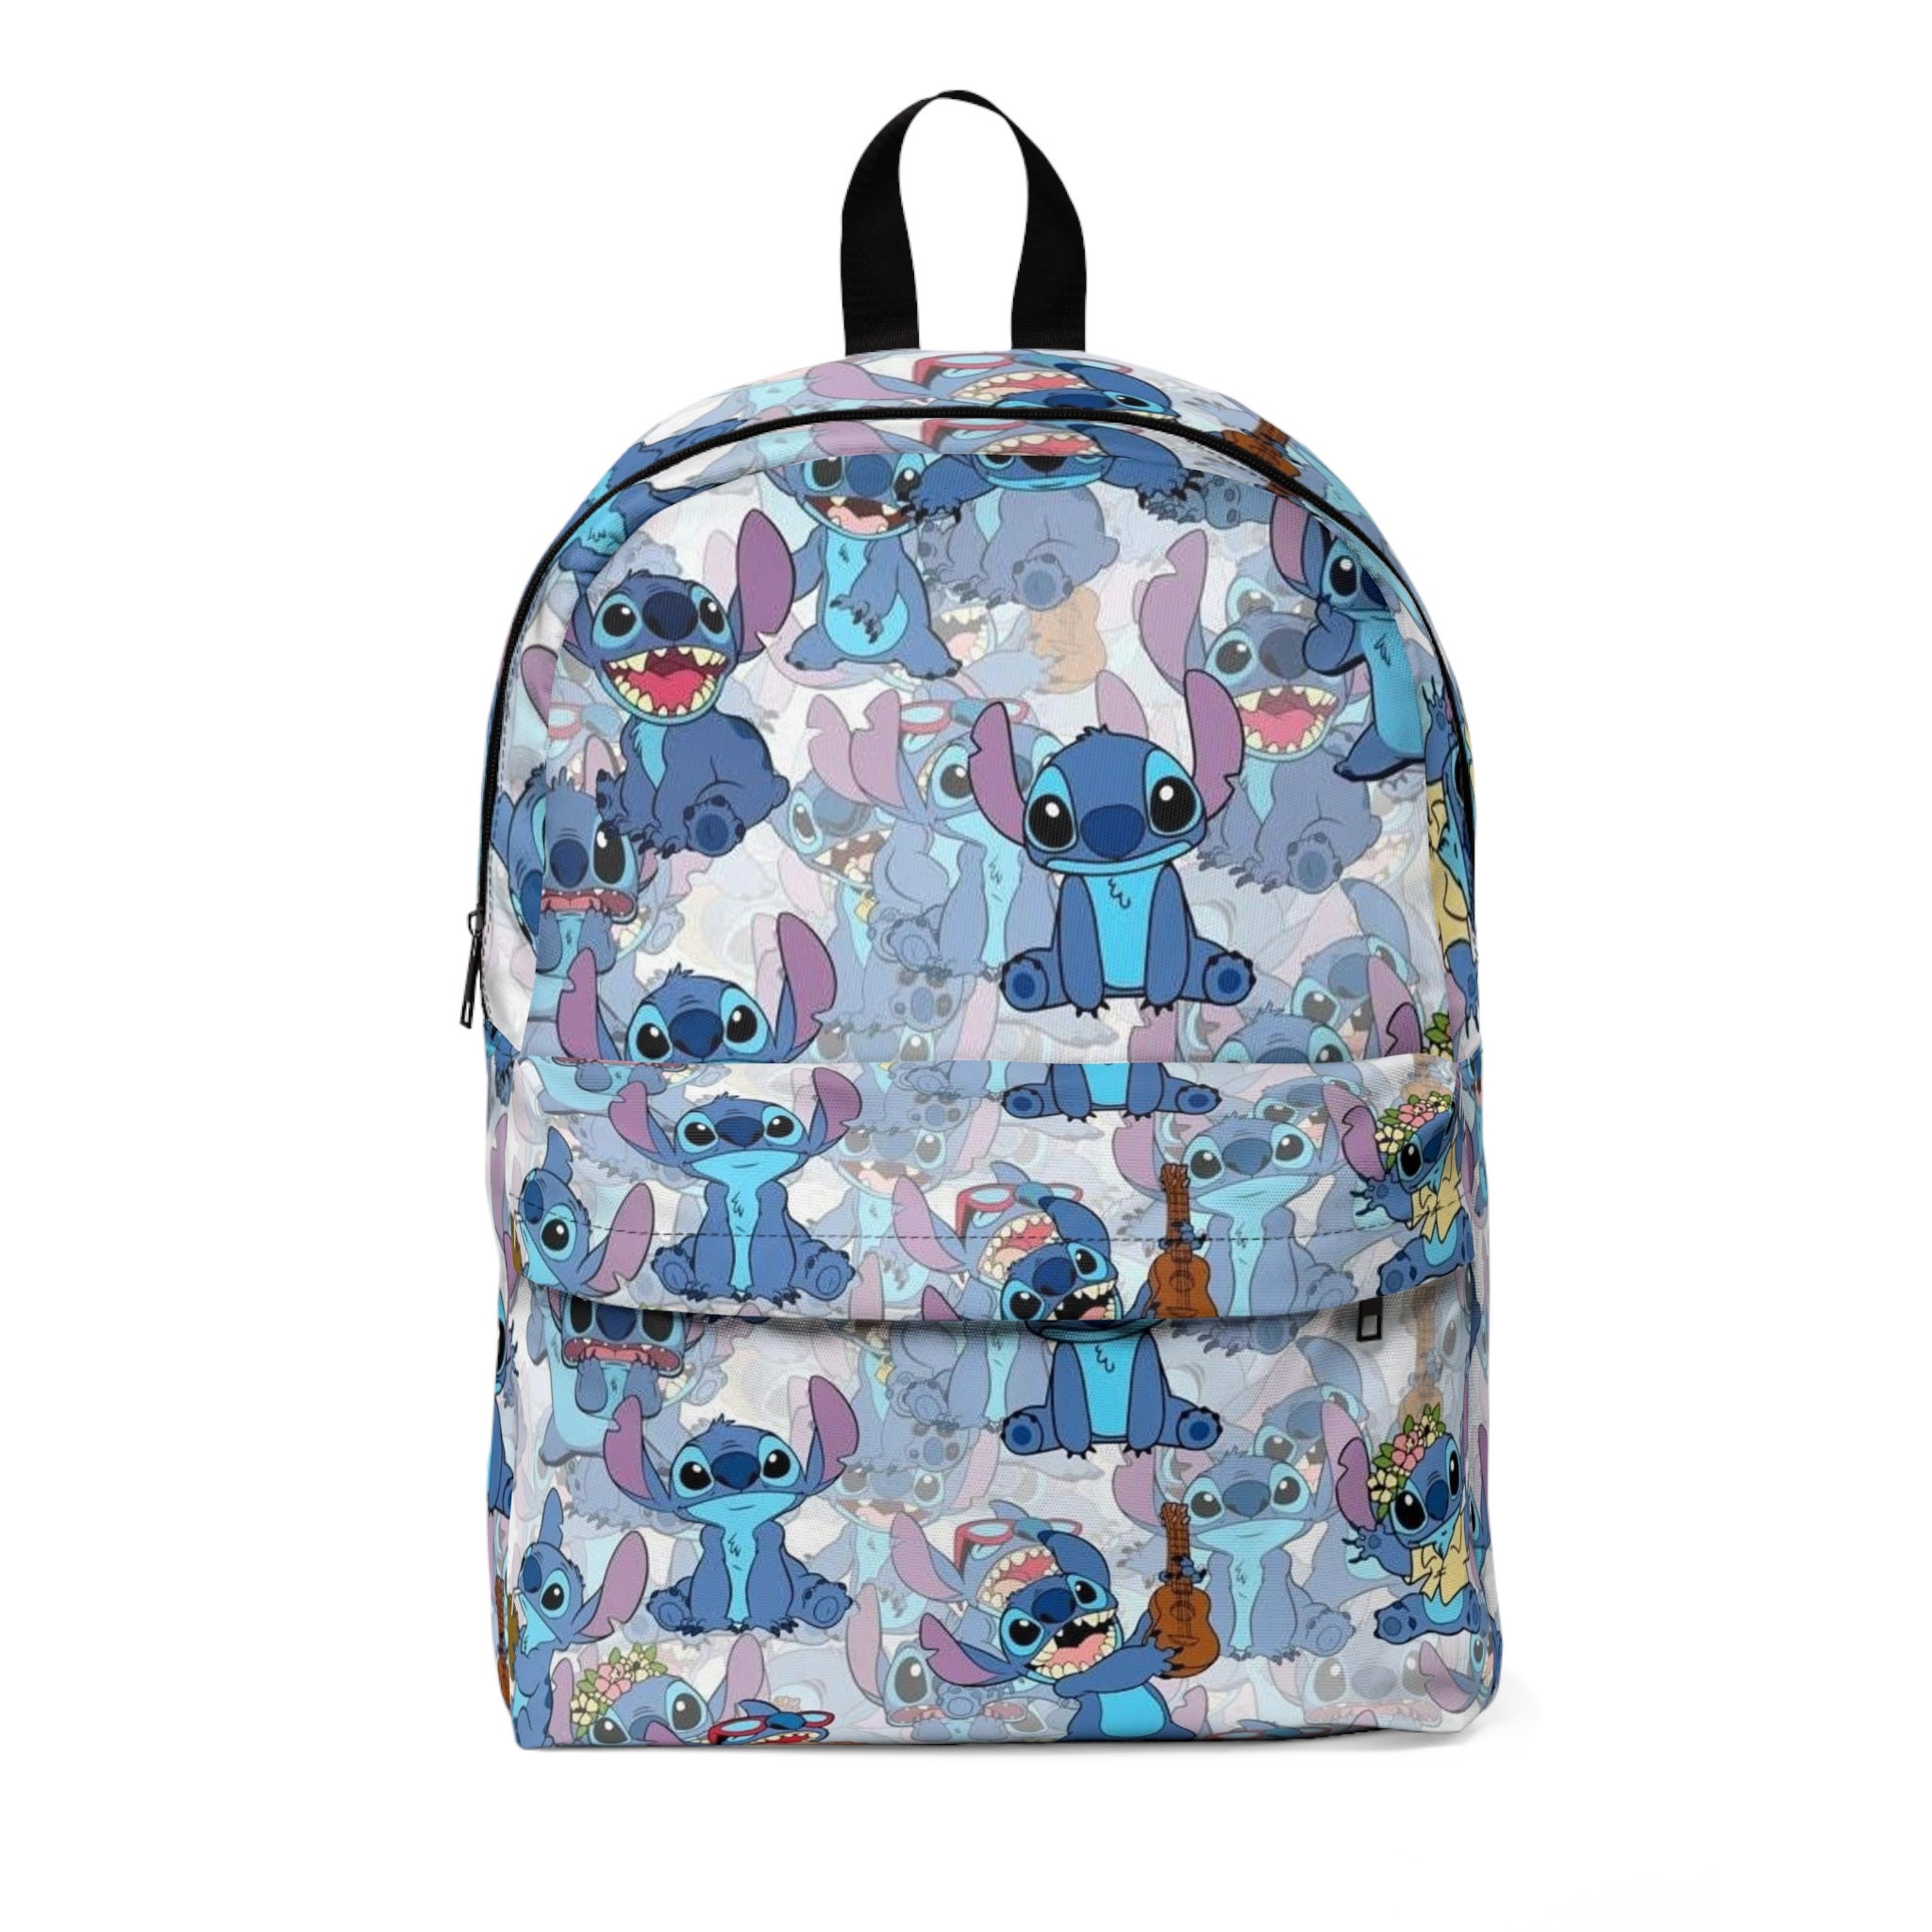 Lilo and Stitch Backpack - Etsy